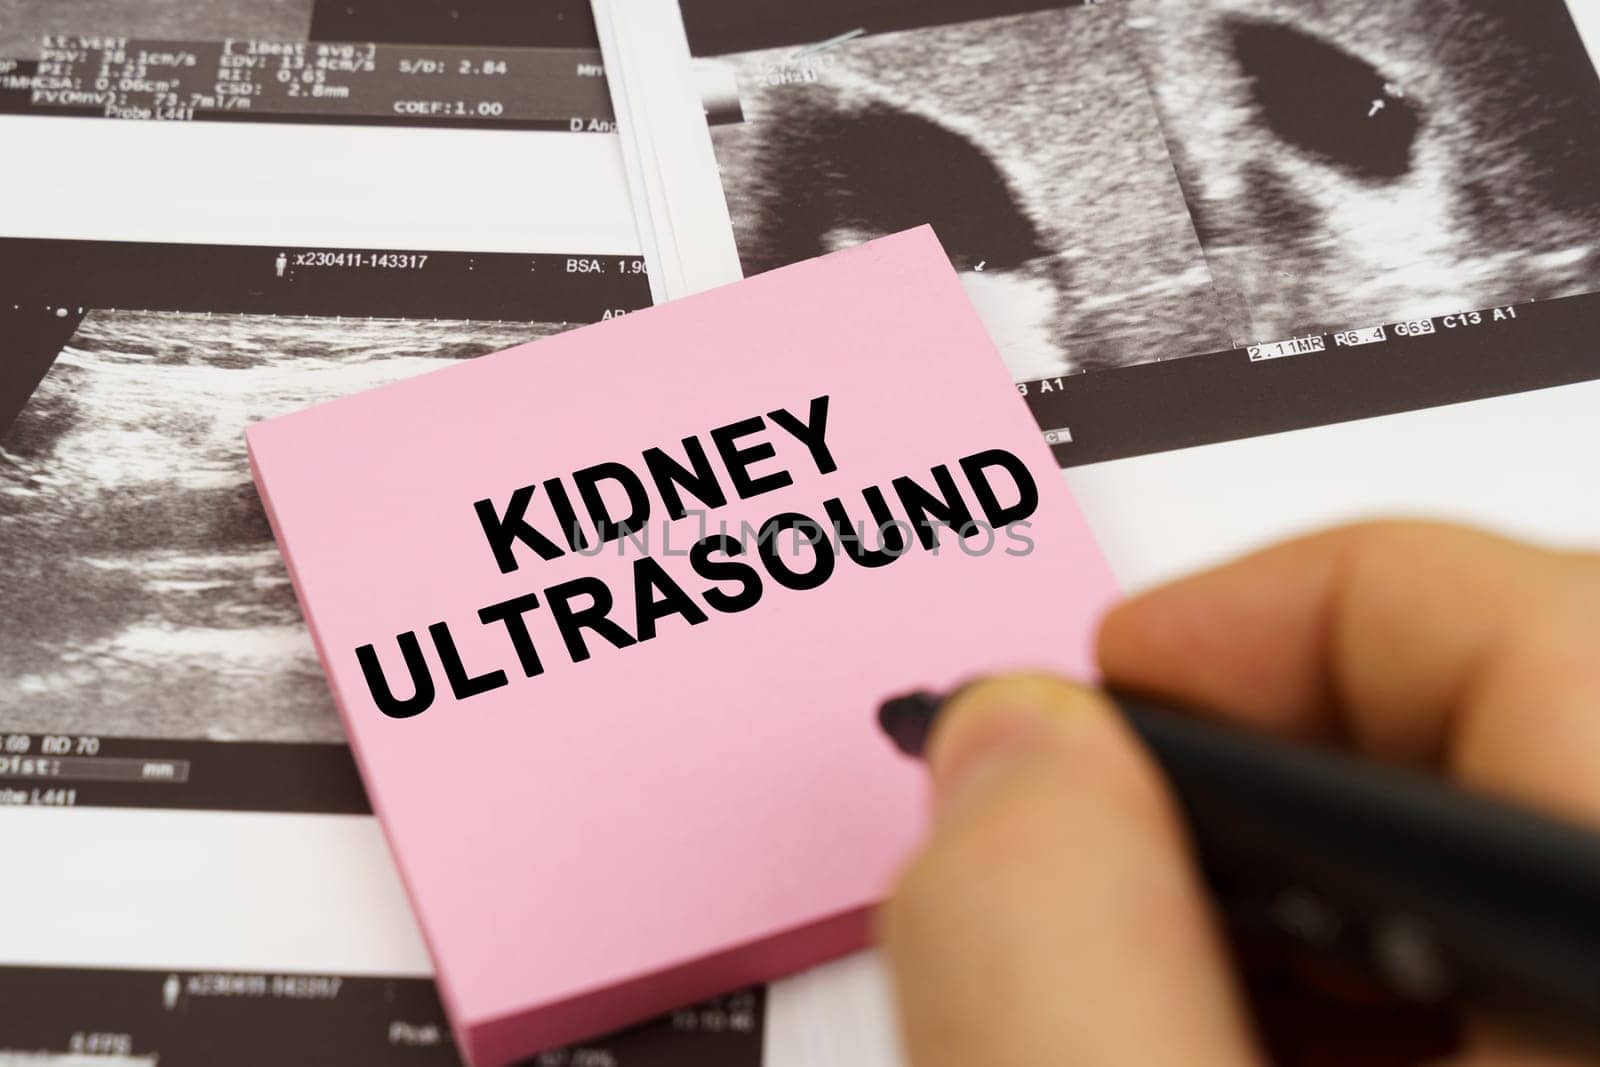 On the ultrasound pictures there are stickers that say - Kidney ultrasound by Sd28DimoN_1976